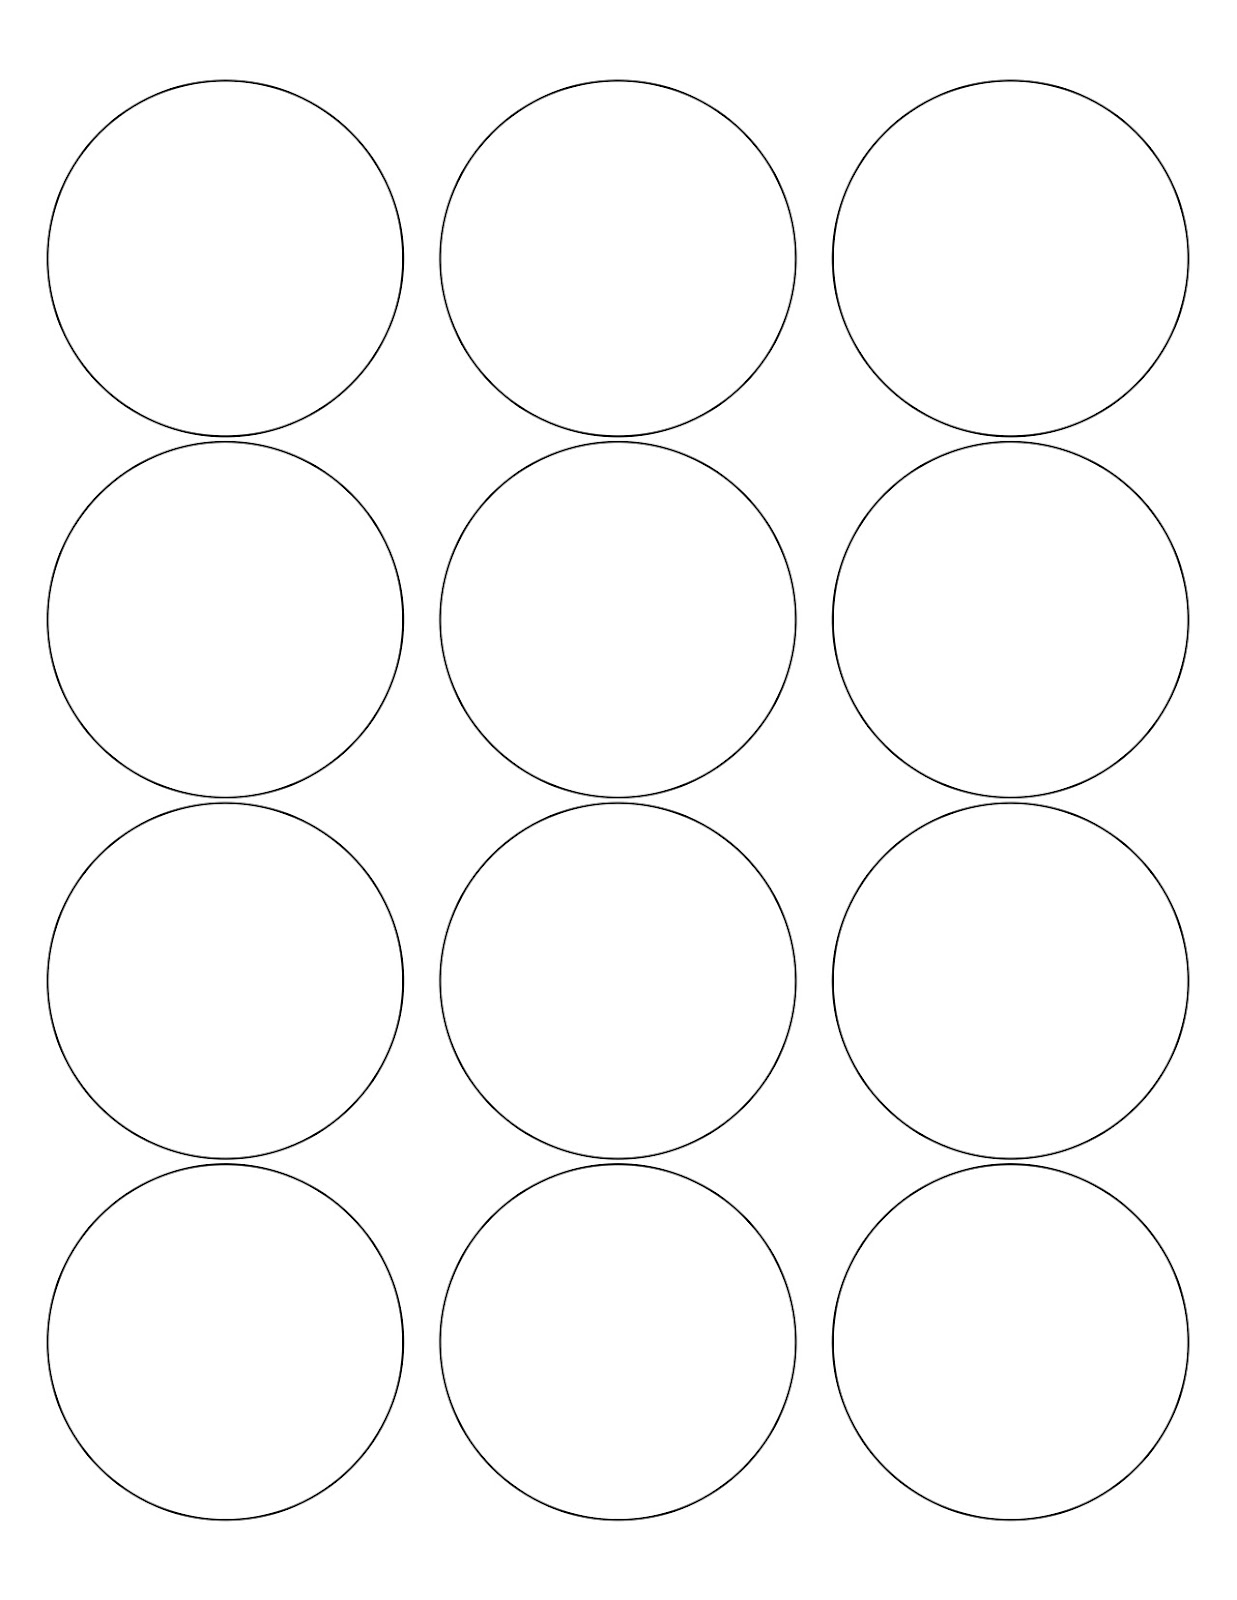 button-badge-template-free-templates-printable-download